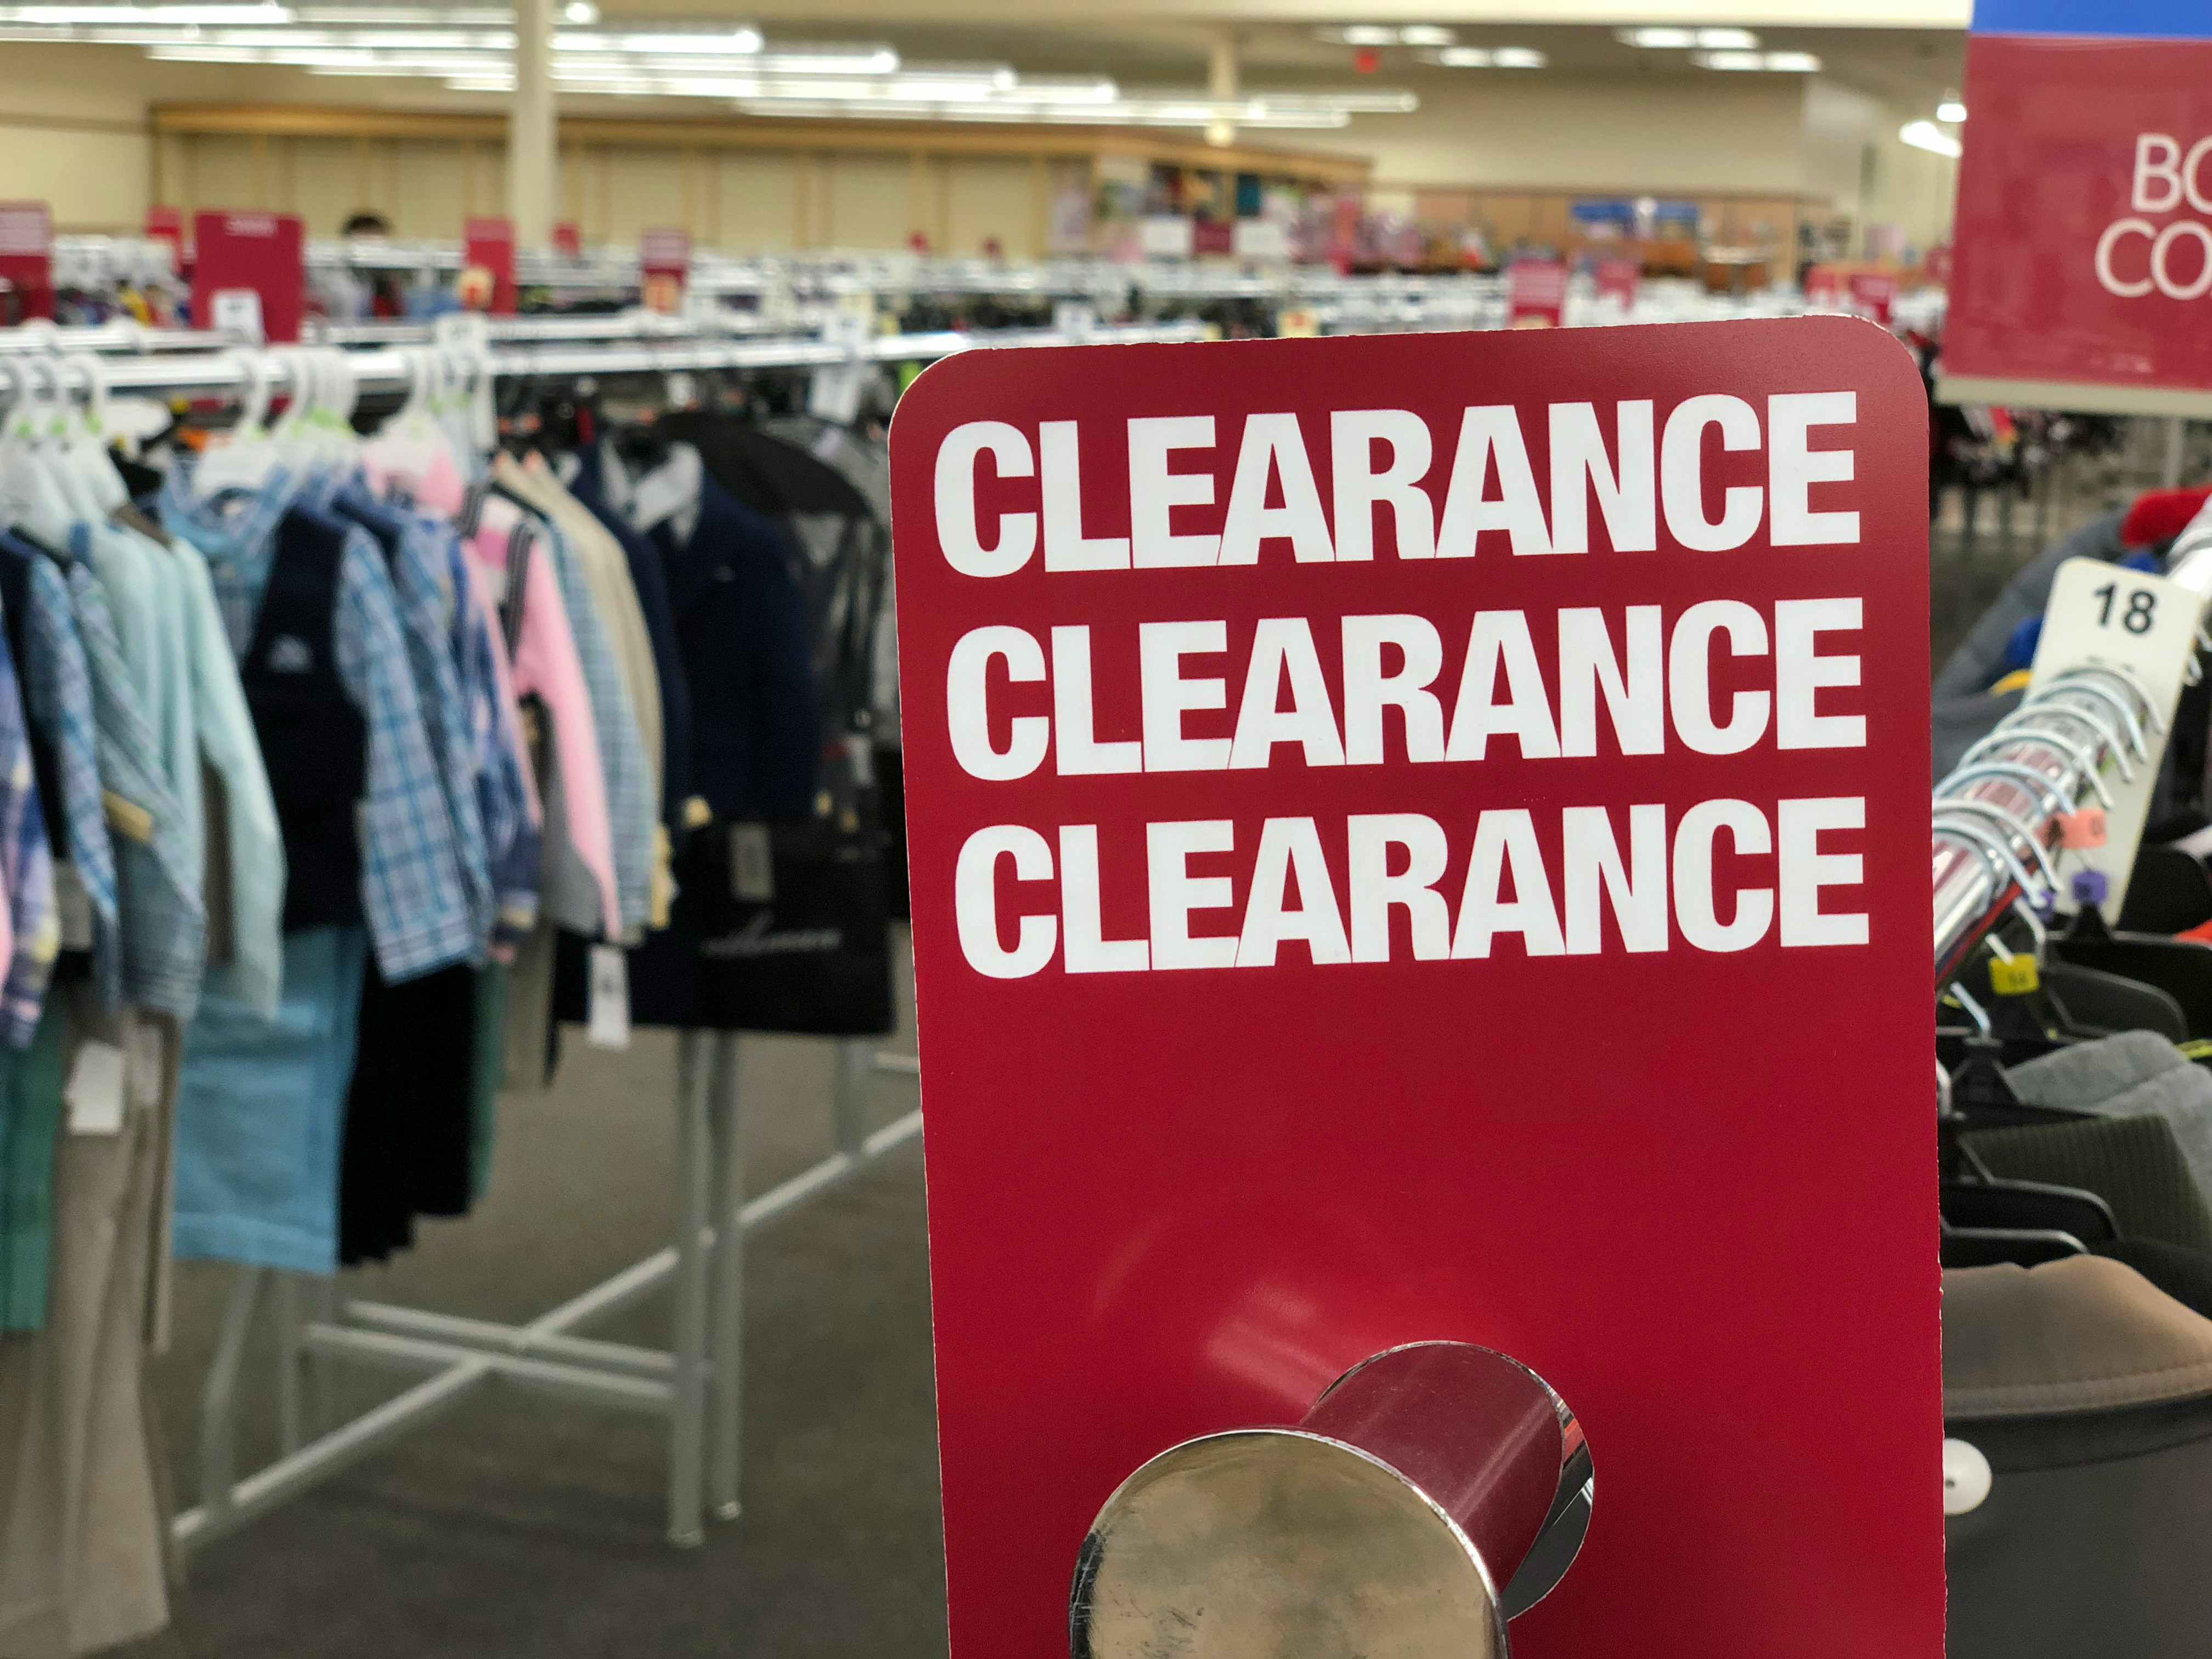 Clearance Sale At Burlington Coat Factory!😱Get Up To 80% Off